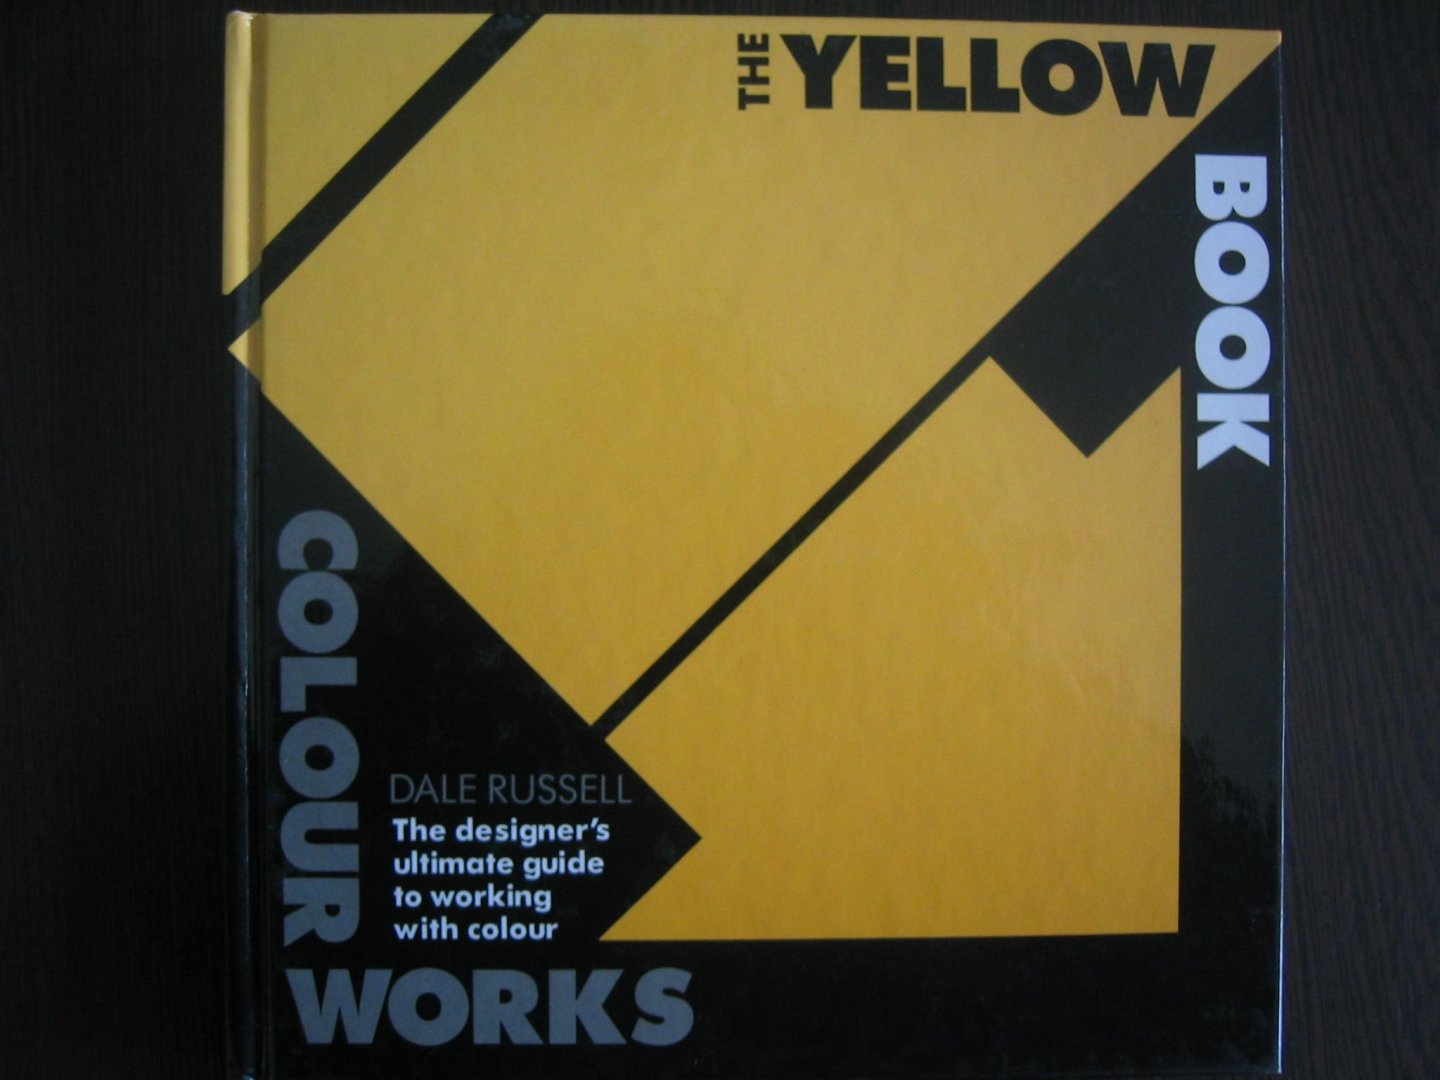 Russell, Dale - Colour Works ! The designer's ultimate guide to working with colours. Yellow Book, Blue Book and Red Book.